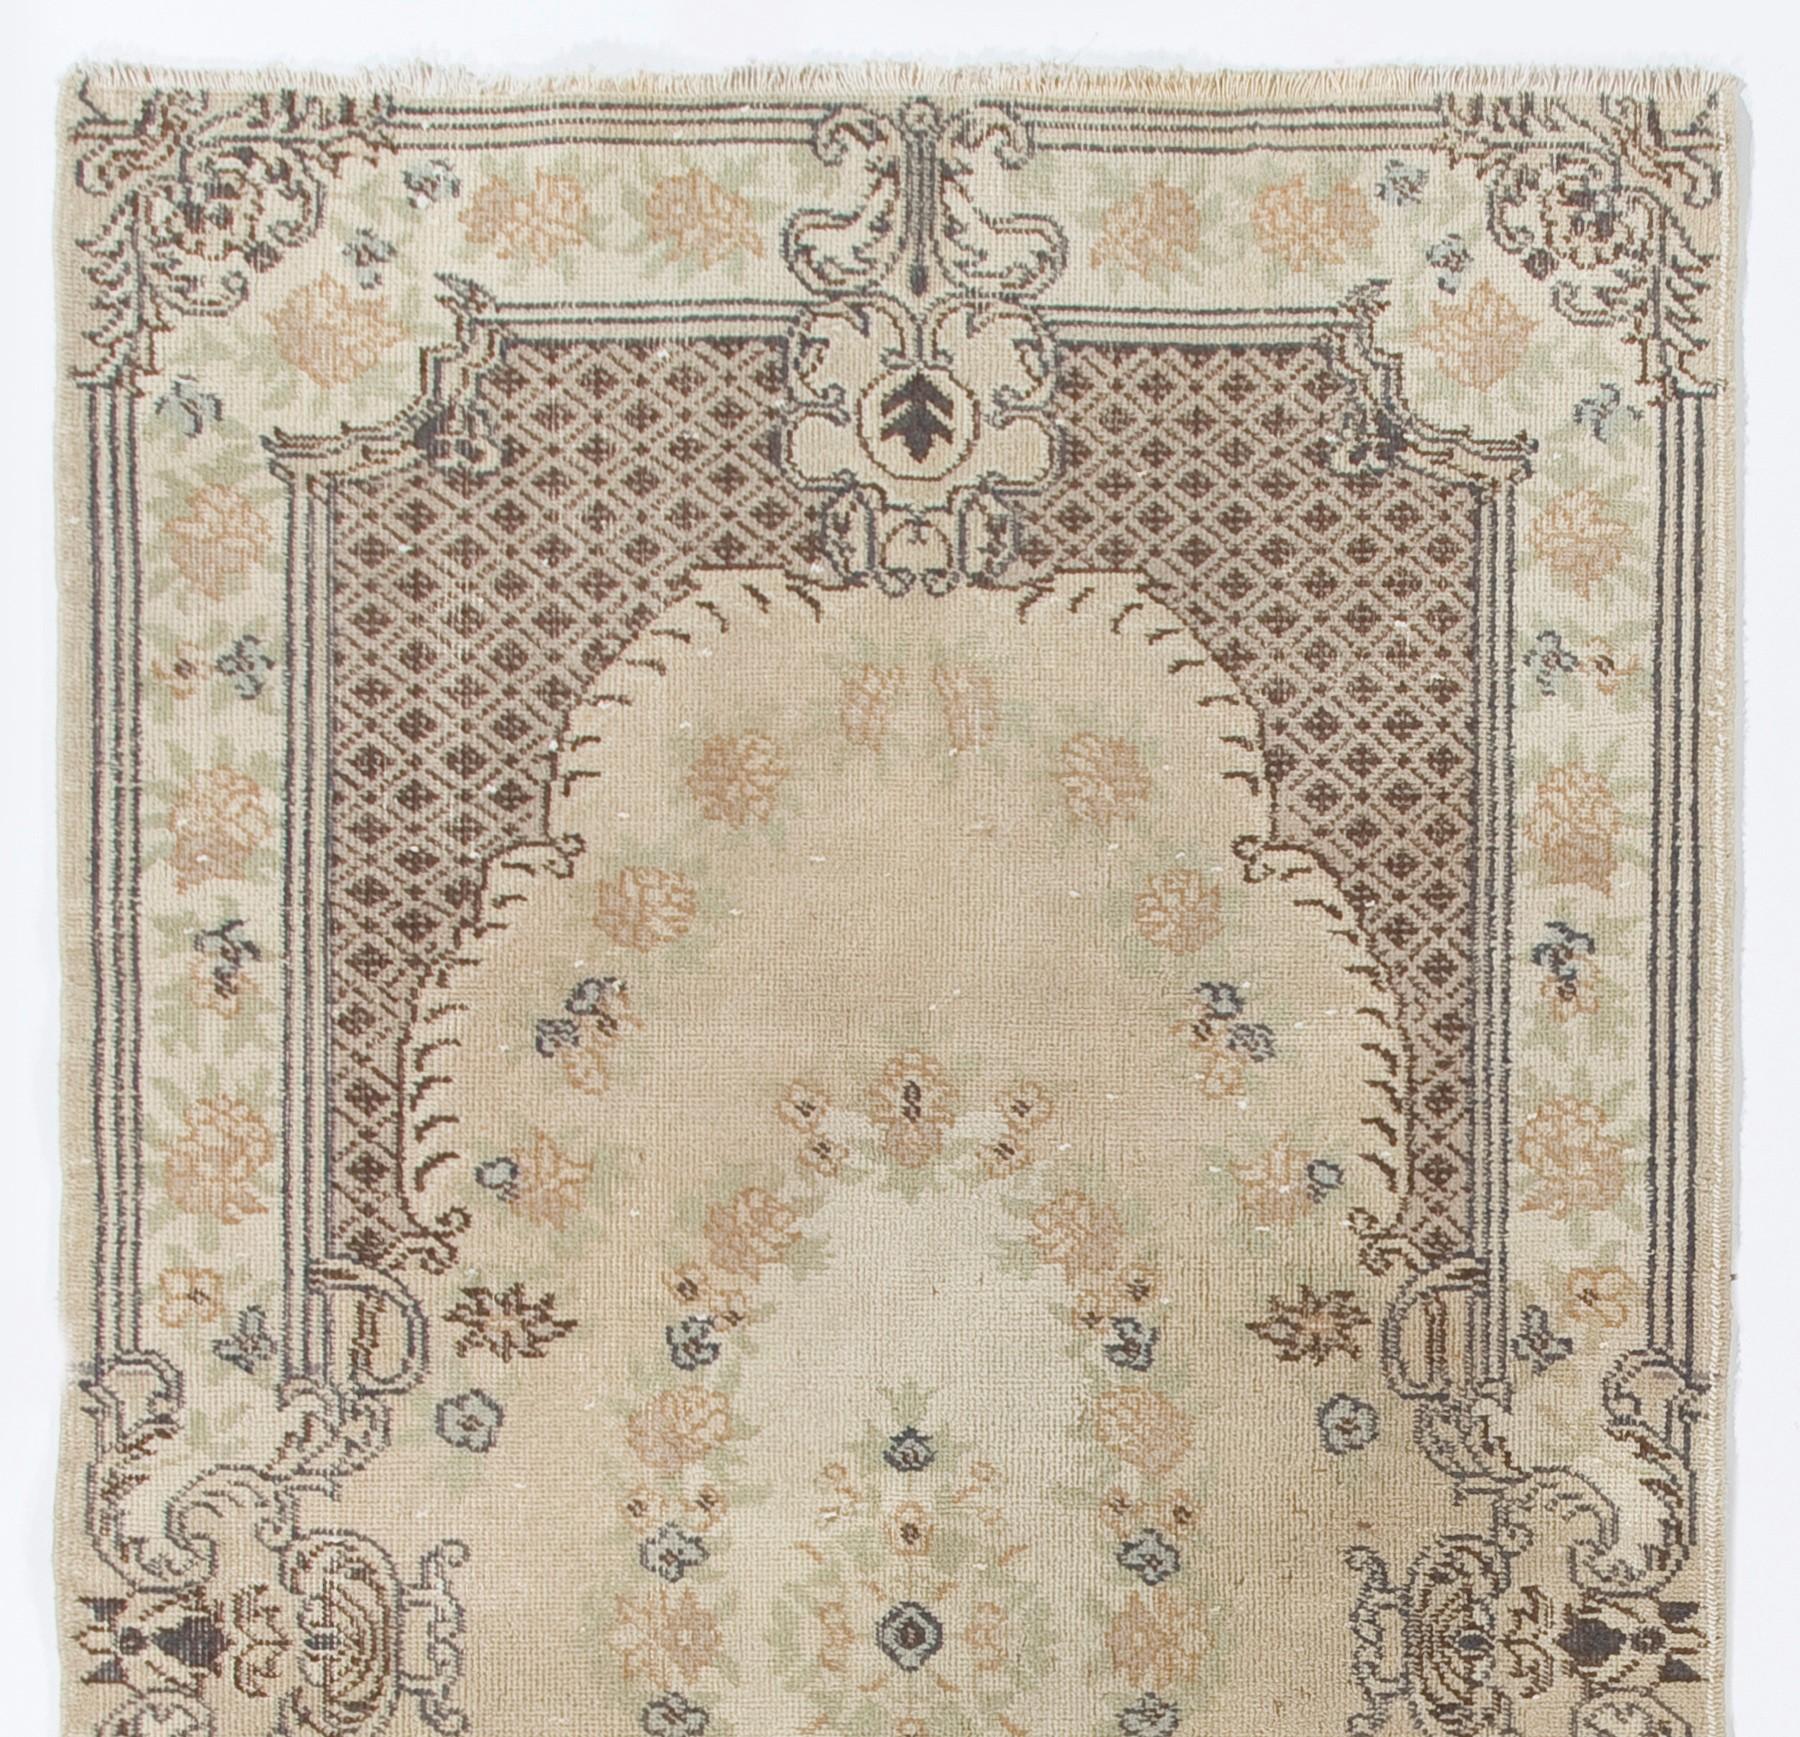 A finely hand knotted mid-20th century area rug from Central West Anatolia with soft colors and low wool pile on cotton foundation. It features a French-Aubusson inspired floral design in soft, neutral tones of beige, sand, taupe and brown. 

The